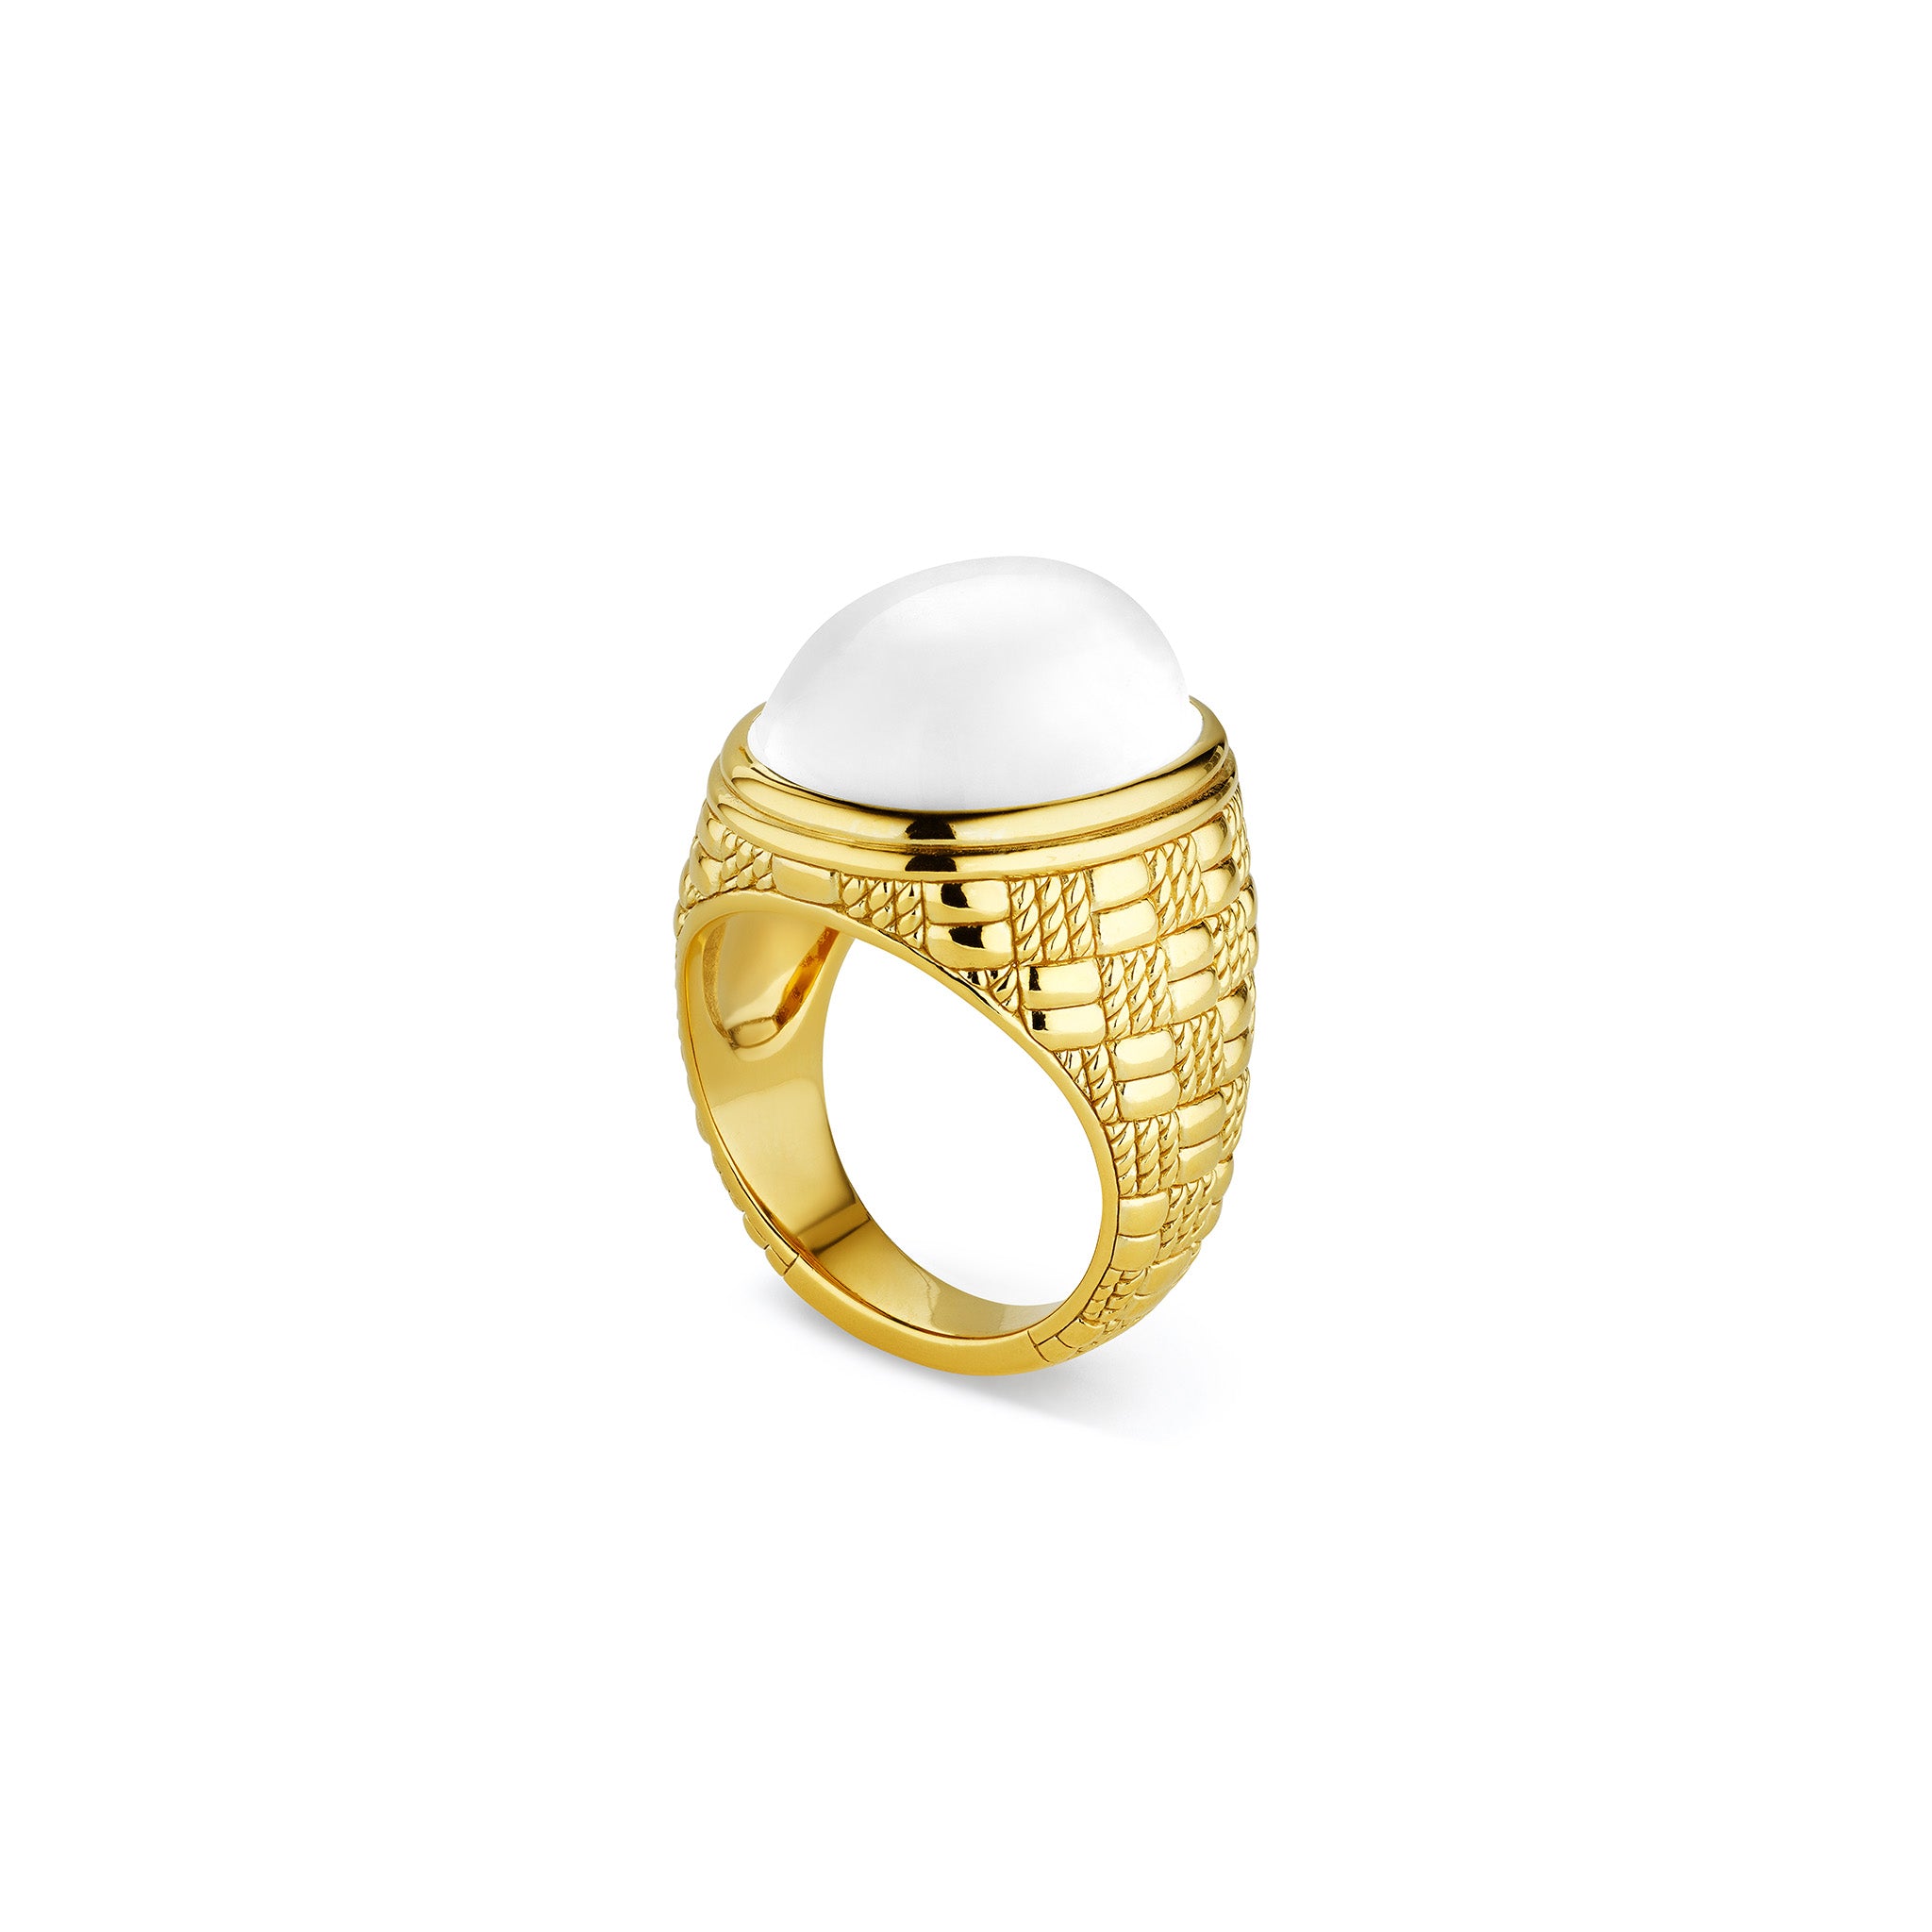 Ocean Reef Ring with White Agate in 18K Gold Vermeil